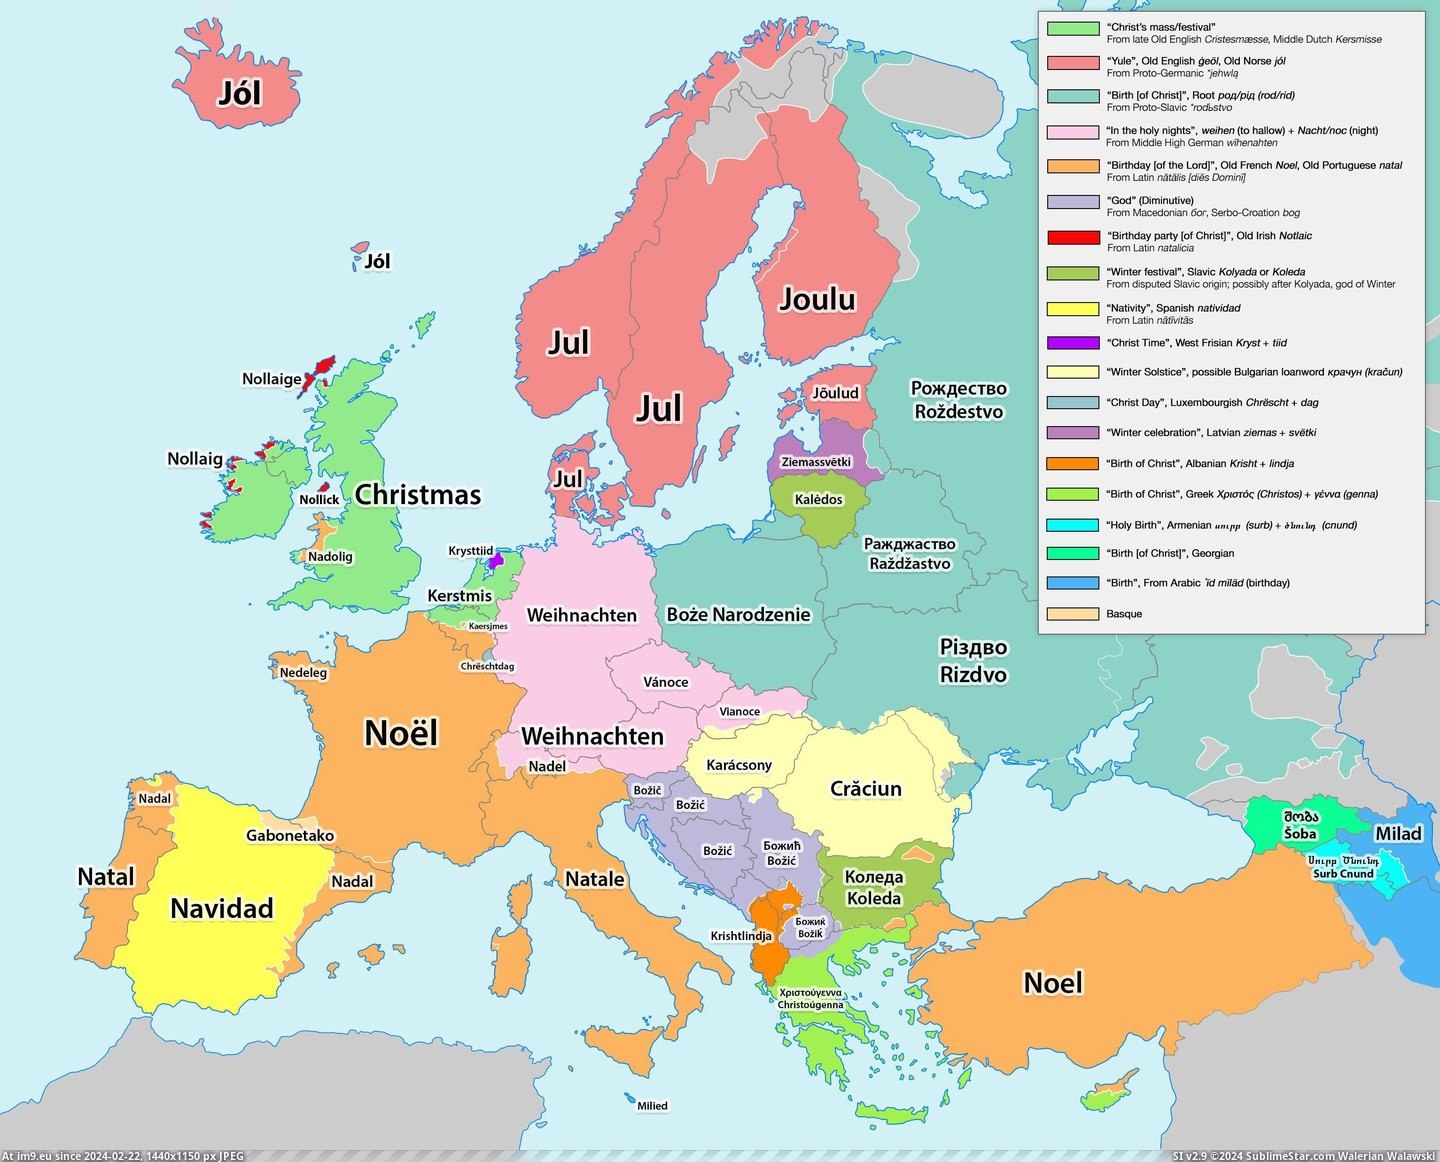 #Europe #Christmas #Translations #Holidays #Etymologies [Mapporn] Where does Christmas come from? Translations and etymologies of holidays in Europe [3065x2460] Pic. (Image of album My r/MAPS favs))